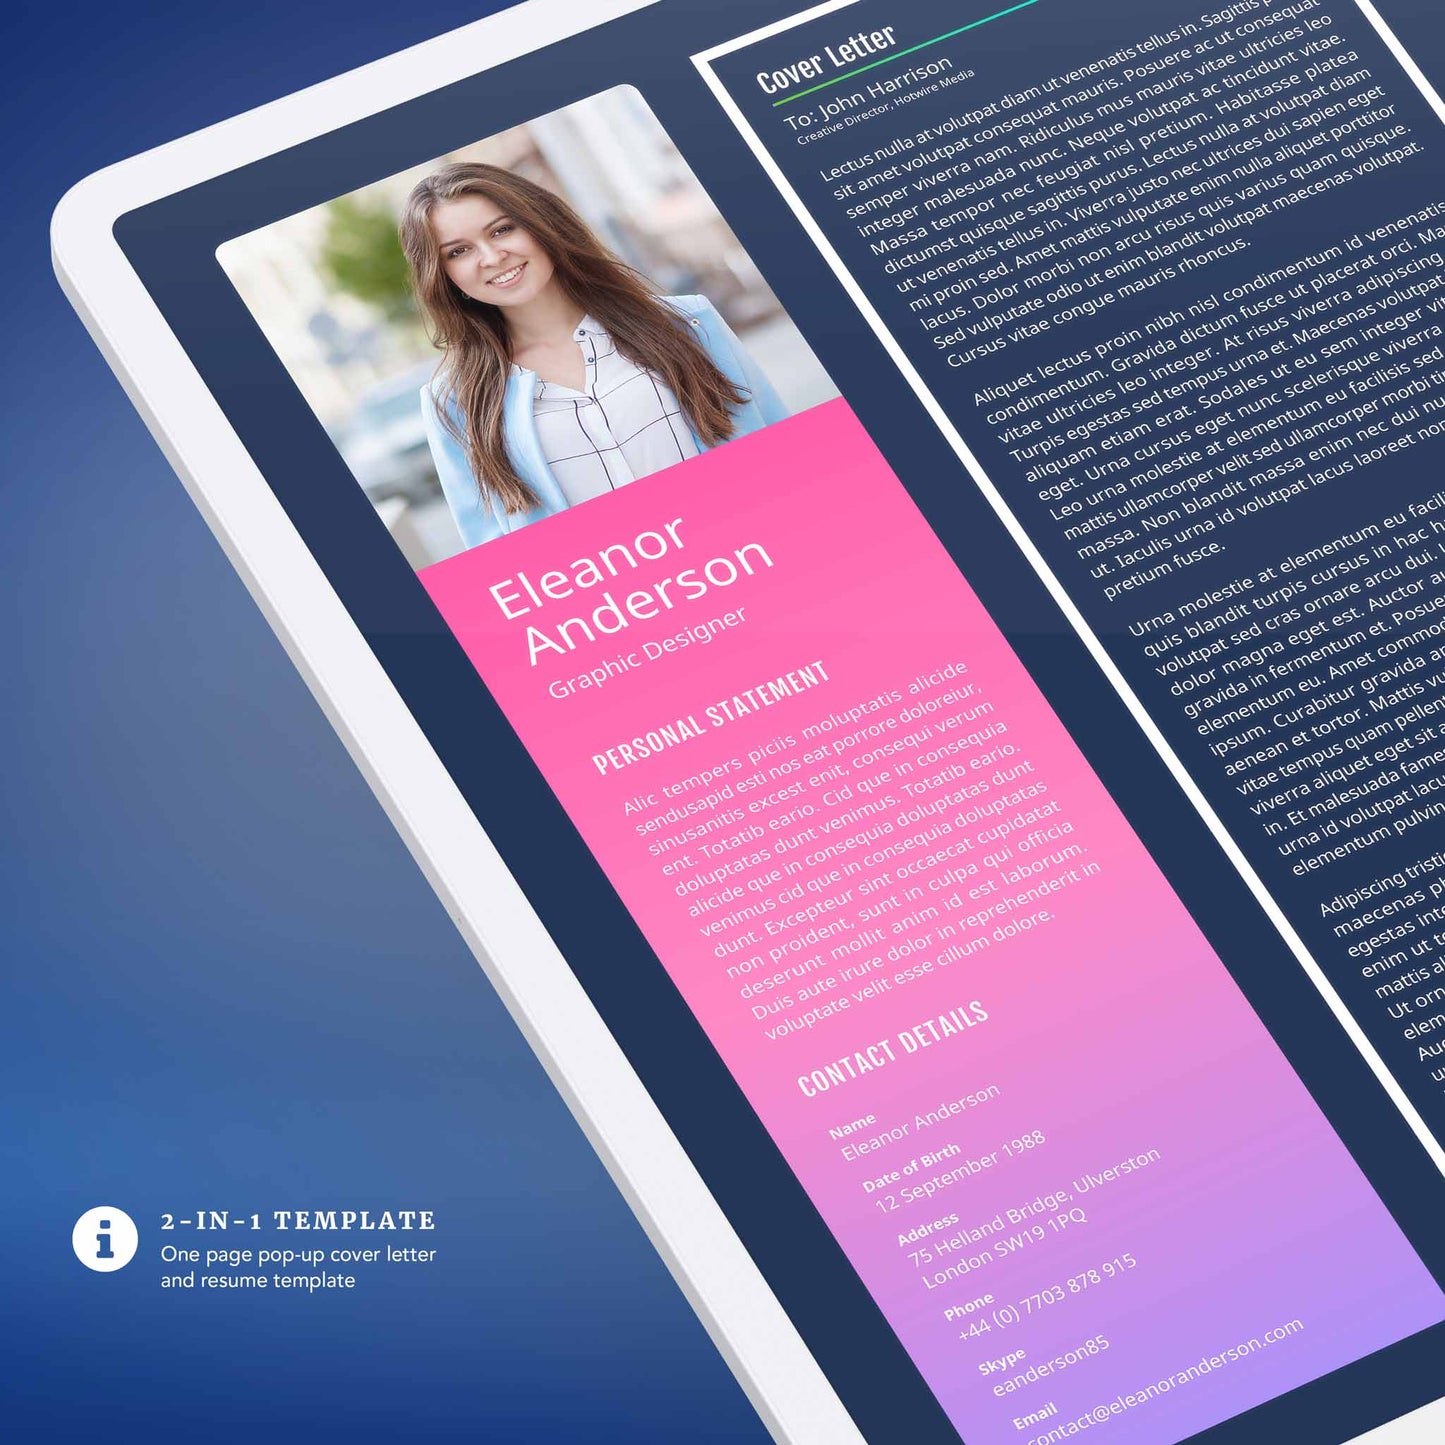 InDesign 2-in-1 Interactive Cover Letter & Resume Template